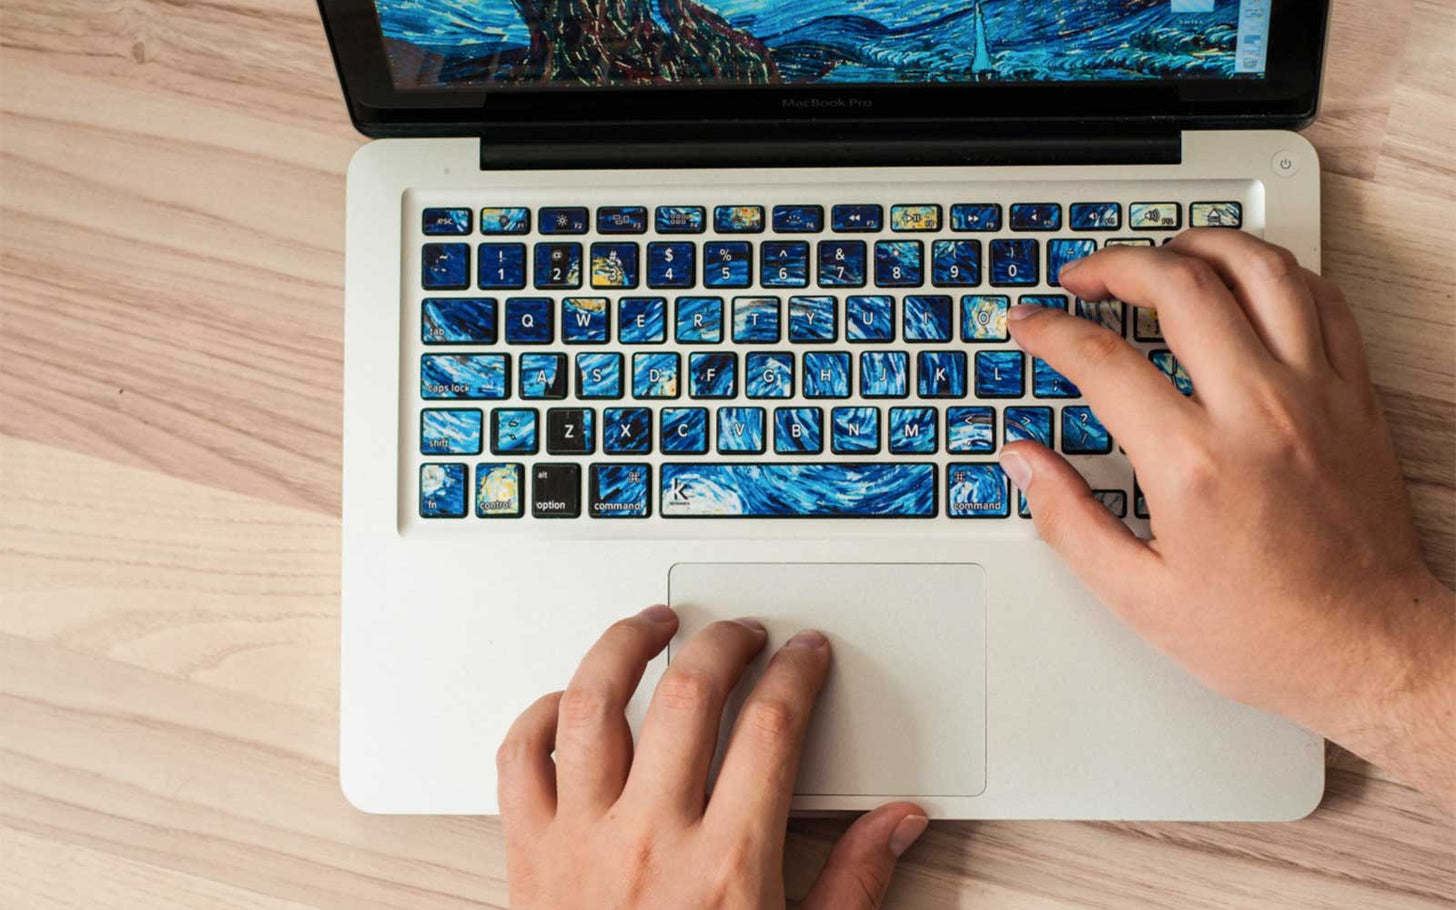 copy and paste on macbook keyboard